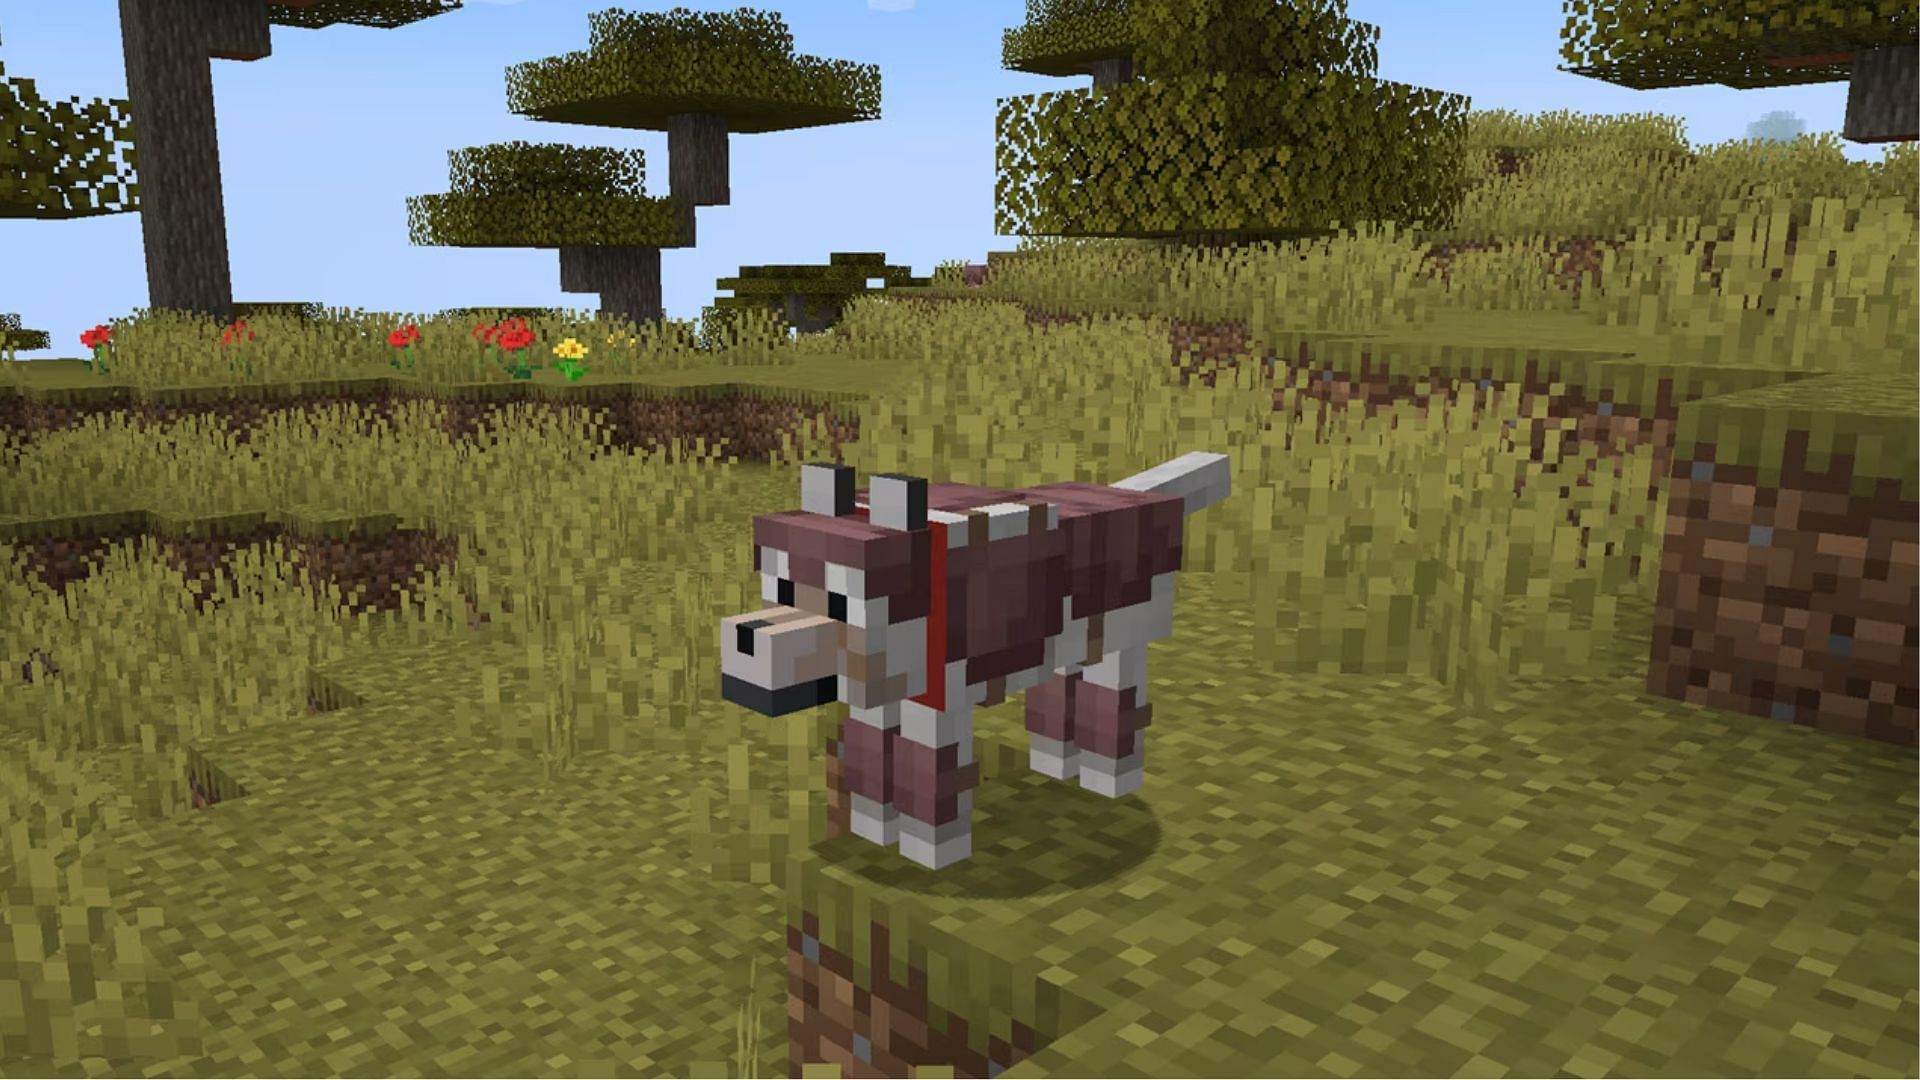 The wolf armor in the game (Image via Mojang Studios)